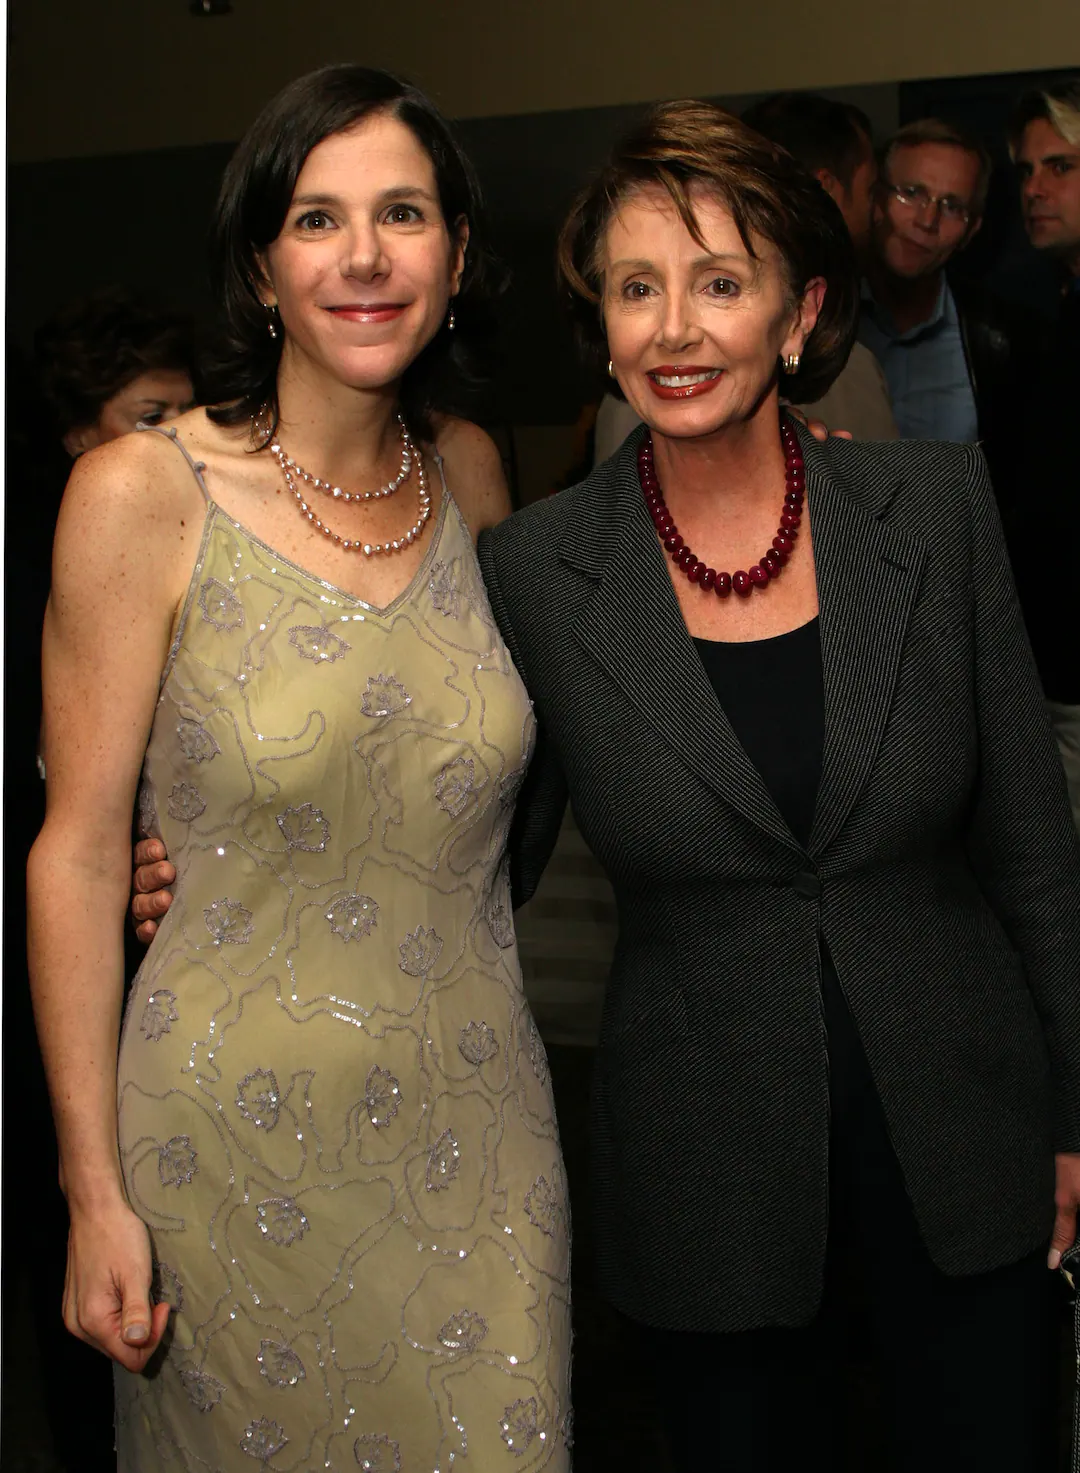 Jacqueline Pelosi with her mother